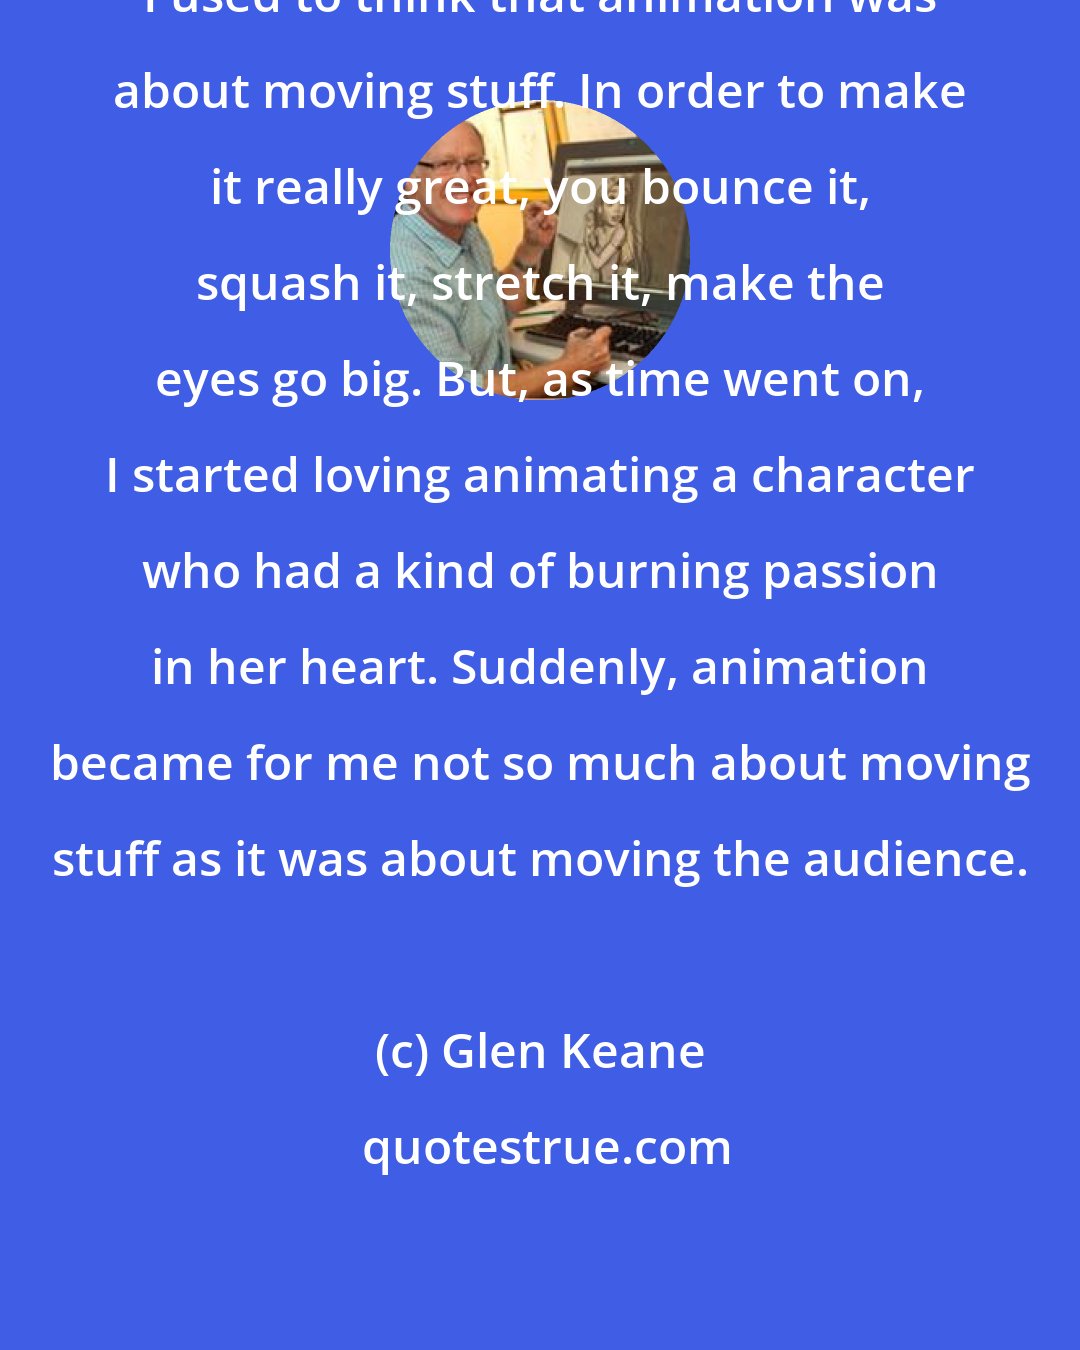 Glen Keane: I used to think that animation was about moving stuff. In order to make it really great, you bounce it, squash it, stretch it, make the eyes go big. But, as time went on, I started loving animating a character who had a kind of burning passion in her heart. Suddenly, animation became for me not so much about moving stuff as it was about moving the audience.